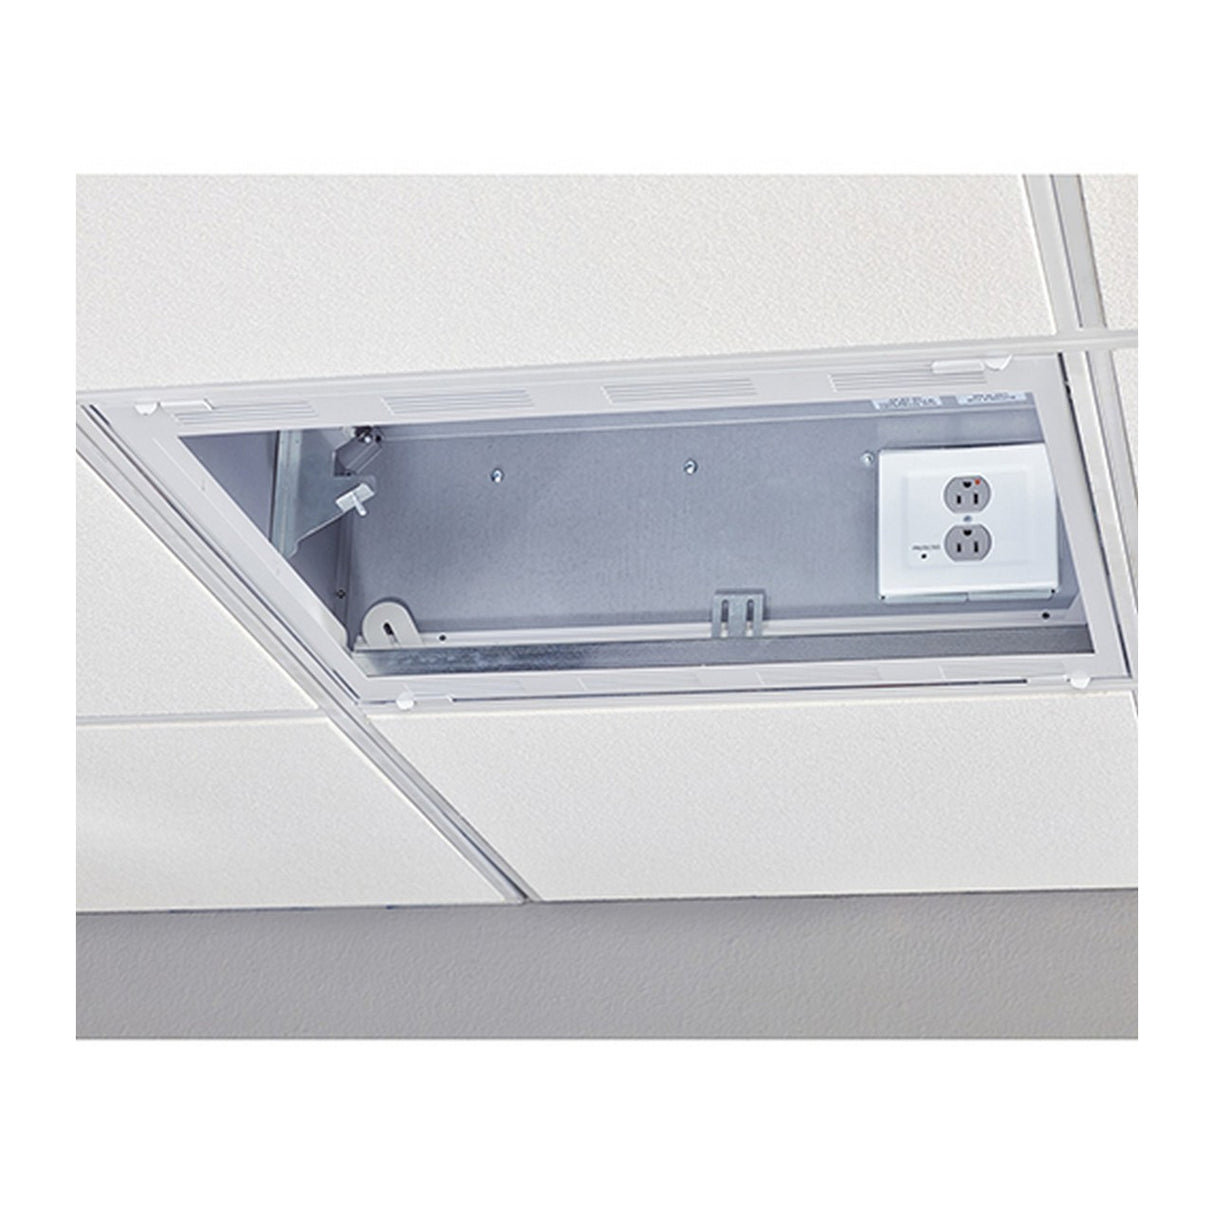 Chief CMS492P2 | 2 x 2 Ceiling Storage Box with 2 Gang Filter Surge White